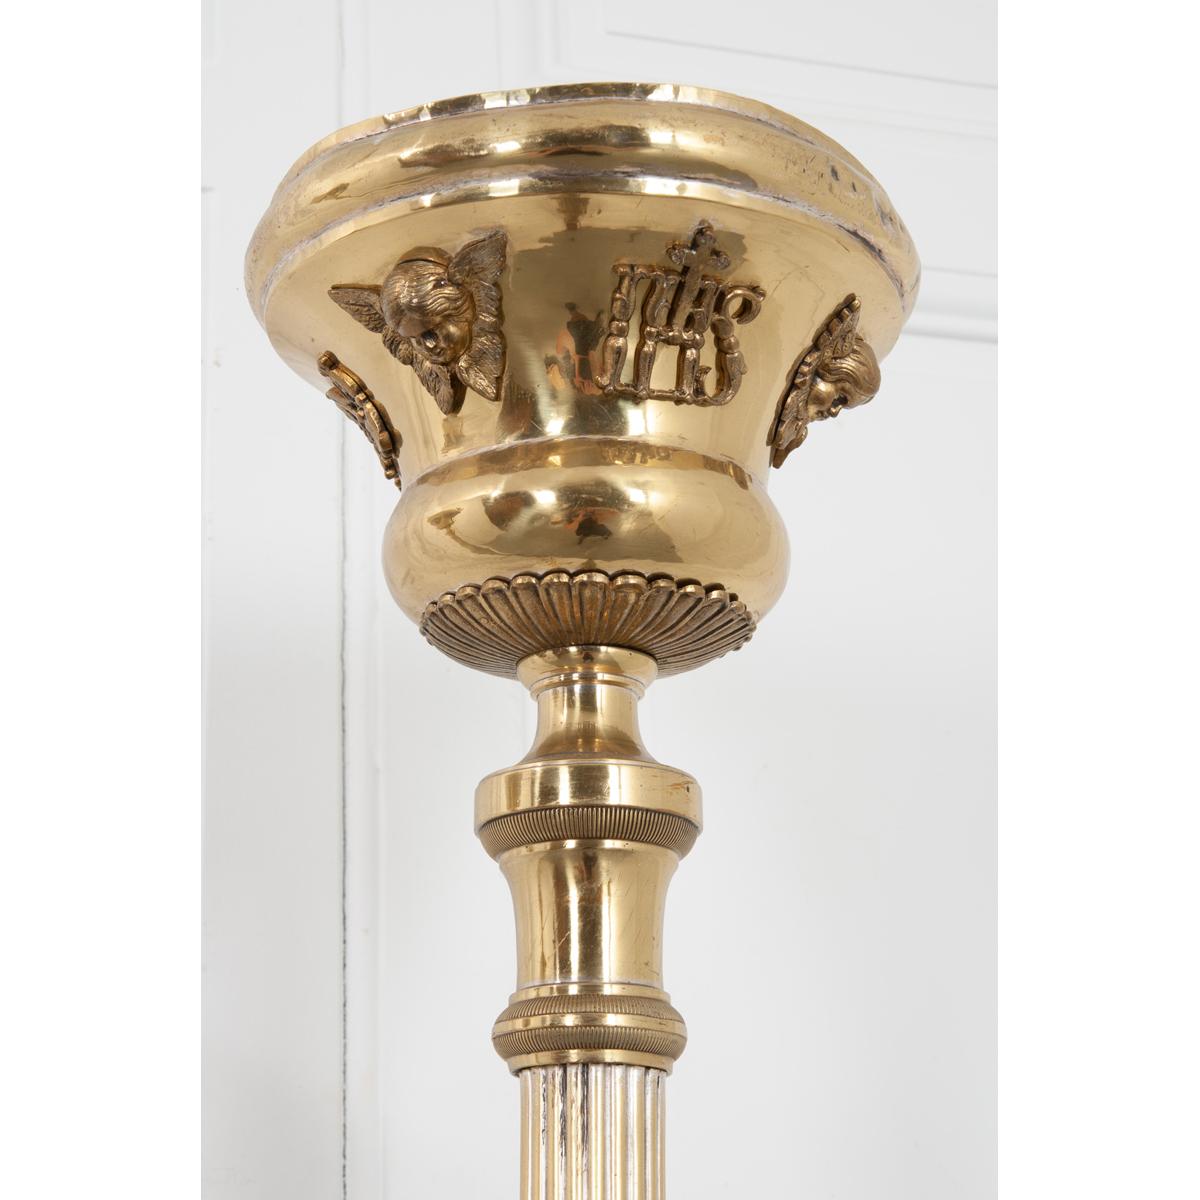 This delightful pair of French 19th century altar torches are made from sturdy wood and metal. Raised gilt brass ornamentation of cherubs and the initials IHS, which stands for Jesus, grace the top of the torches. At one time these would have been